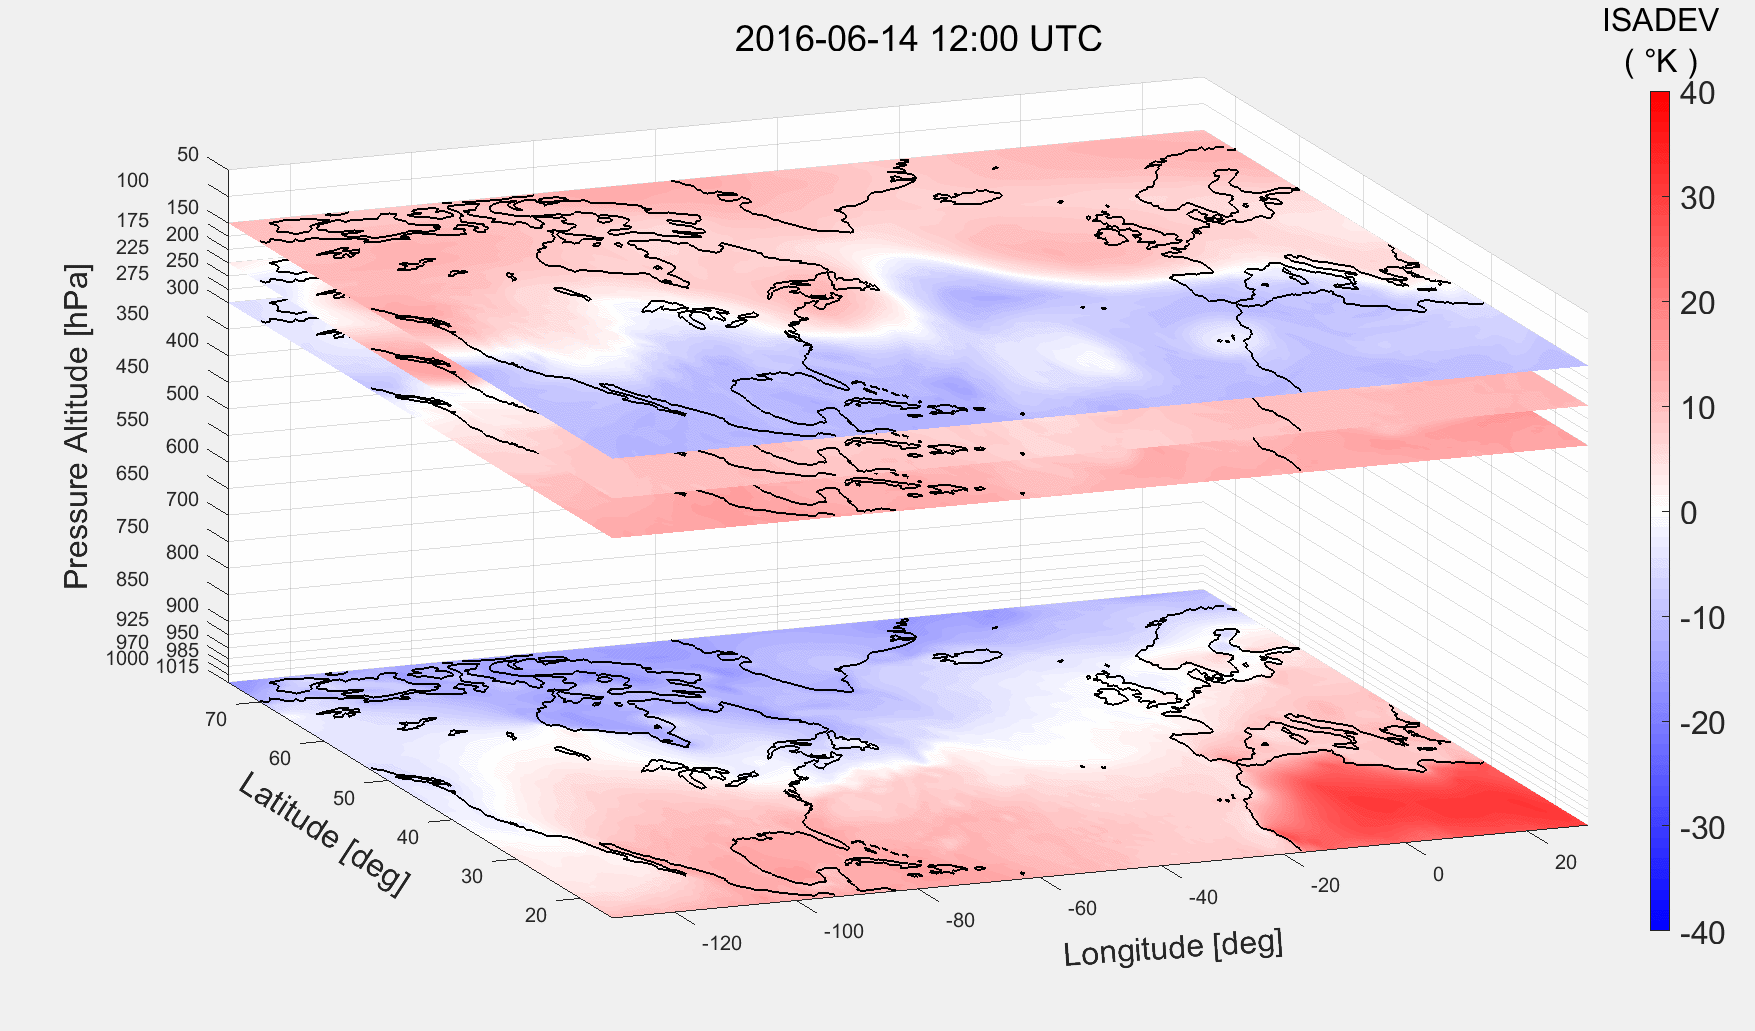 Variation of atmospheric pressure forecastissued by Environment Canada